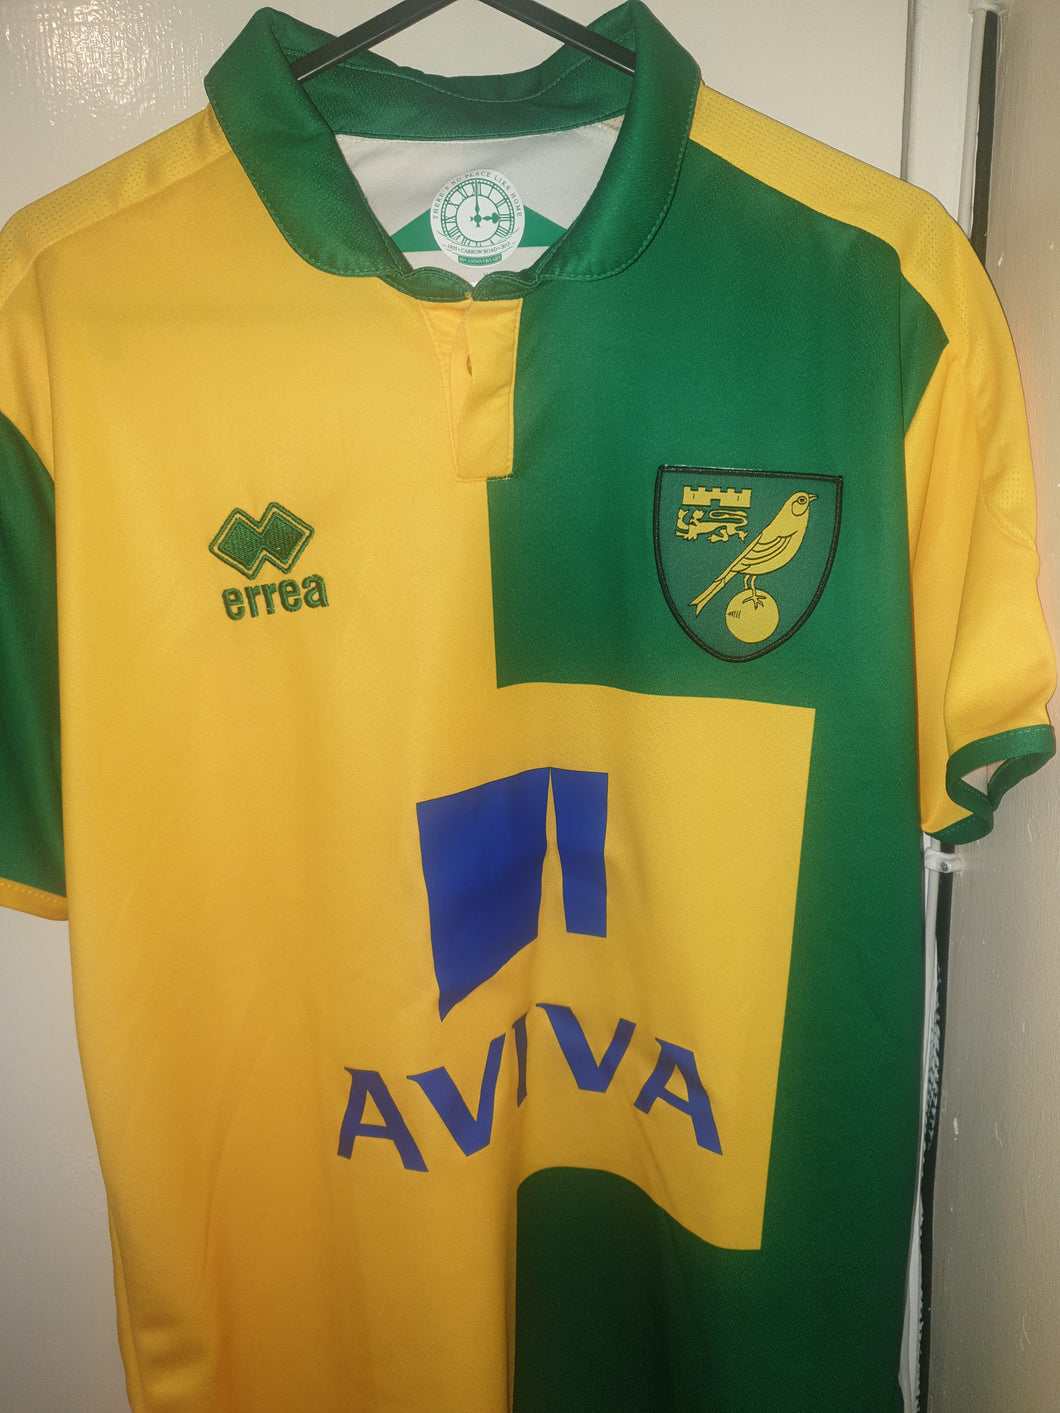 Norwich City 2015-16 Home Shirt (Size Small)